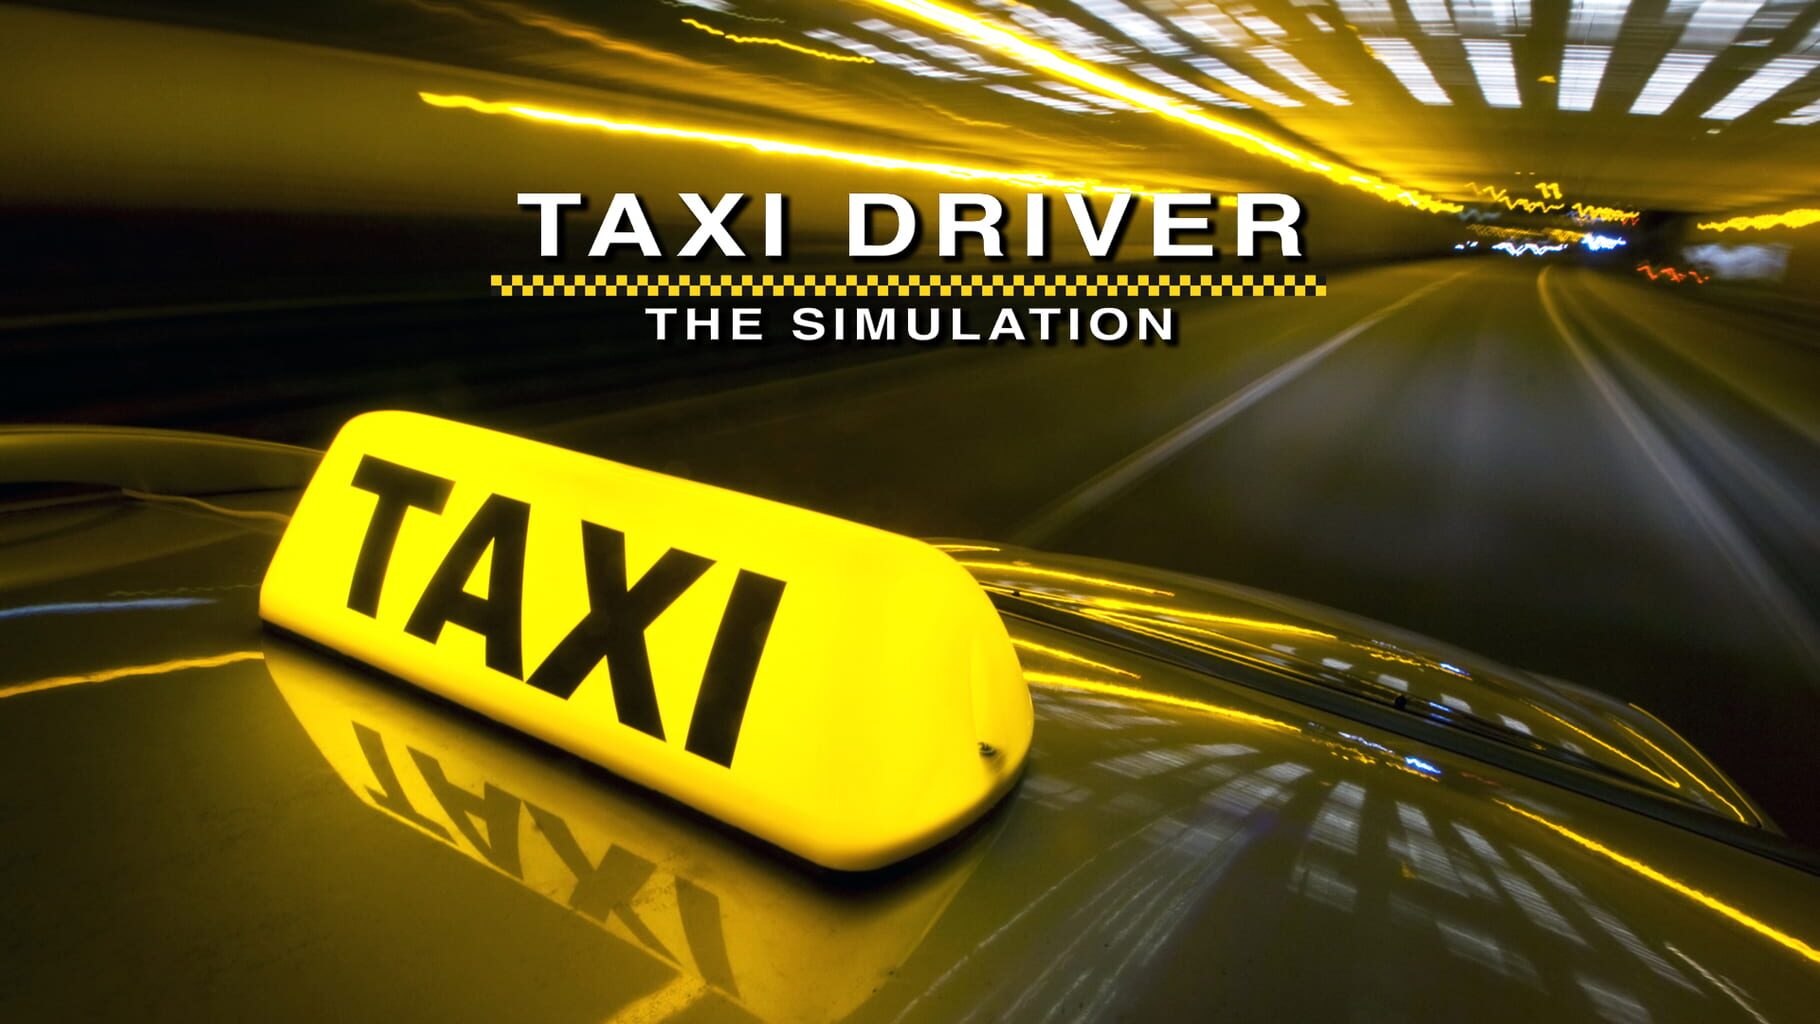 Taxi Driver: The Simulation artwork